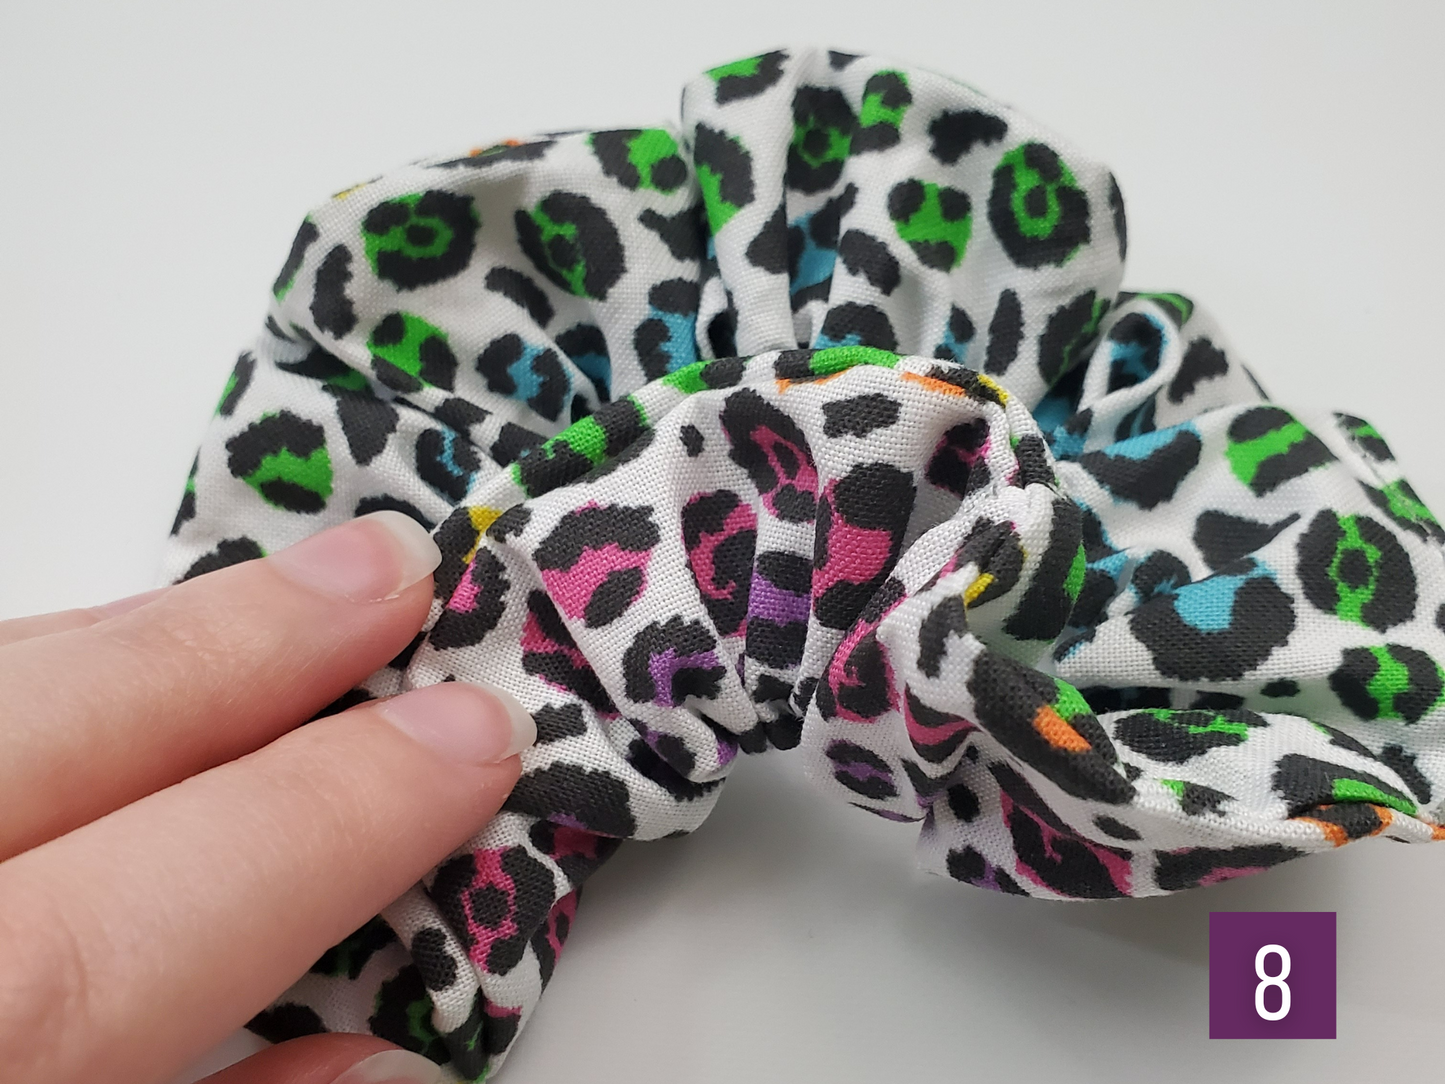 Print number 8 - a rainbow cheetah print. I am folding the scrunchie to show the rainbow continues all the way around. One side is more blue and green, the other is more pink and purple.